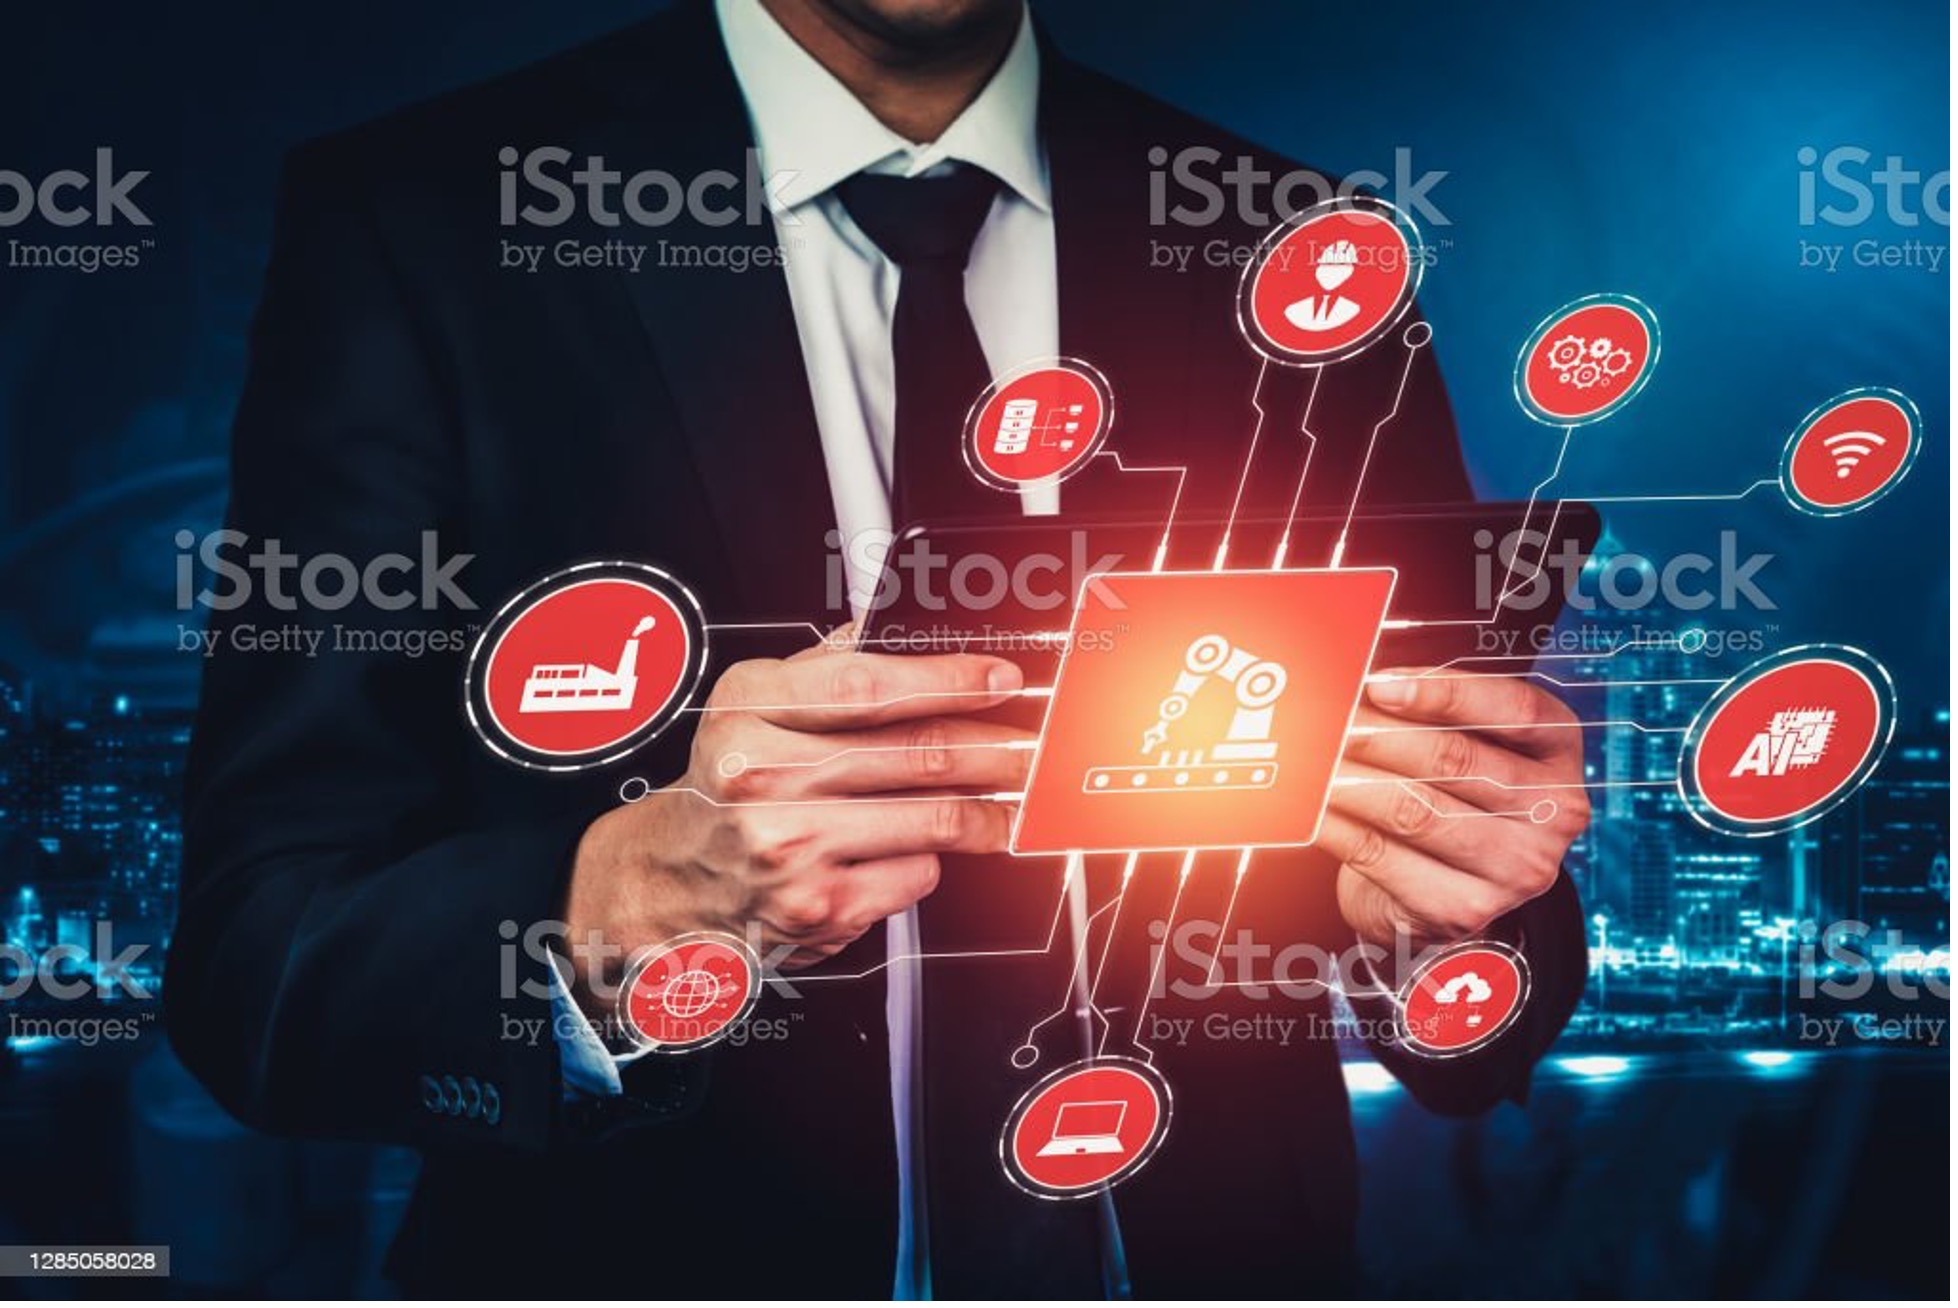 A man with a tablet is his hands and a lot of logistics icons